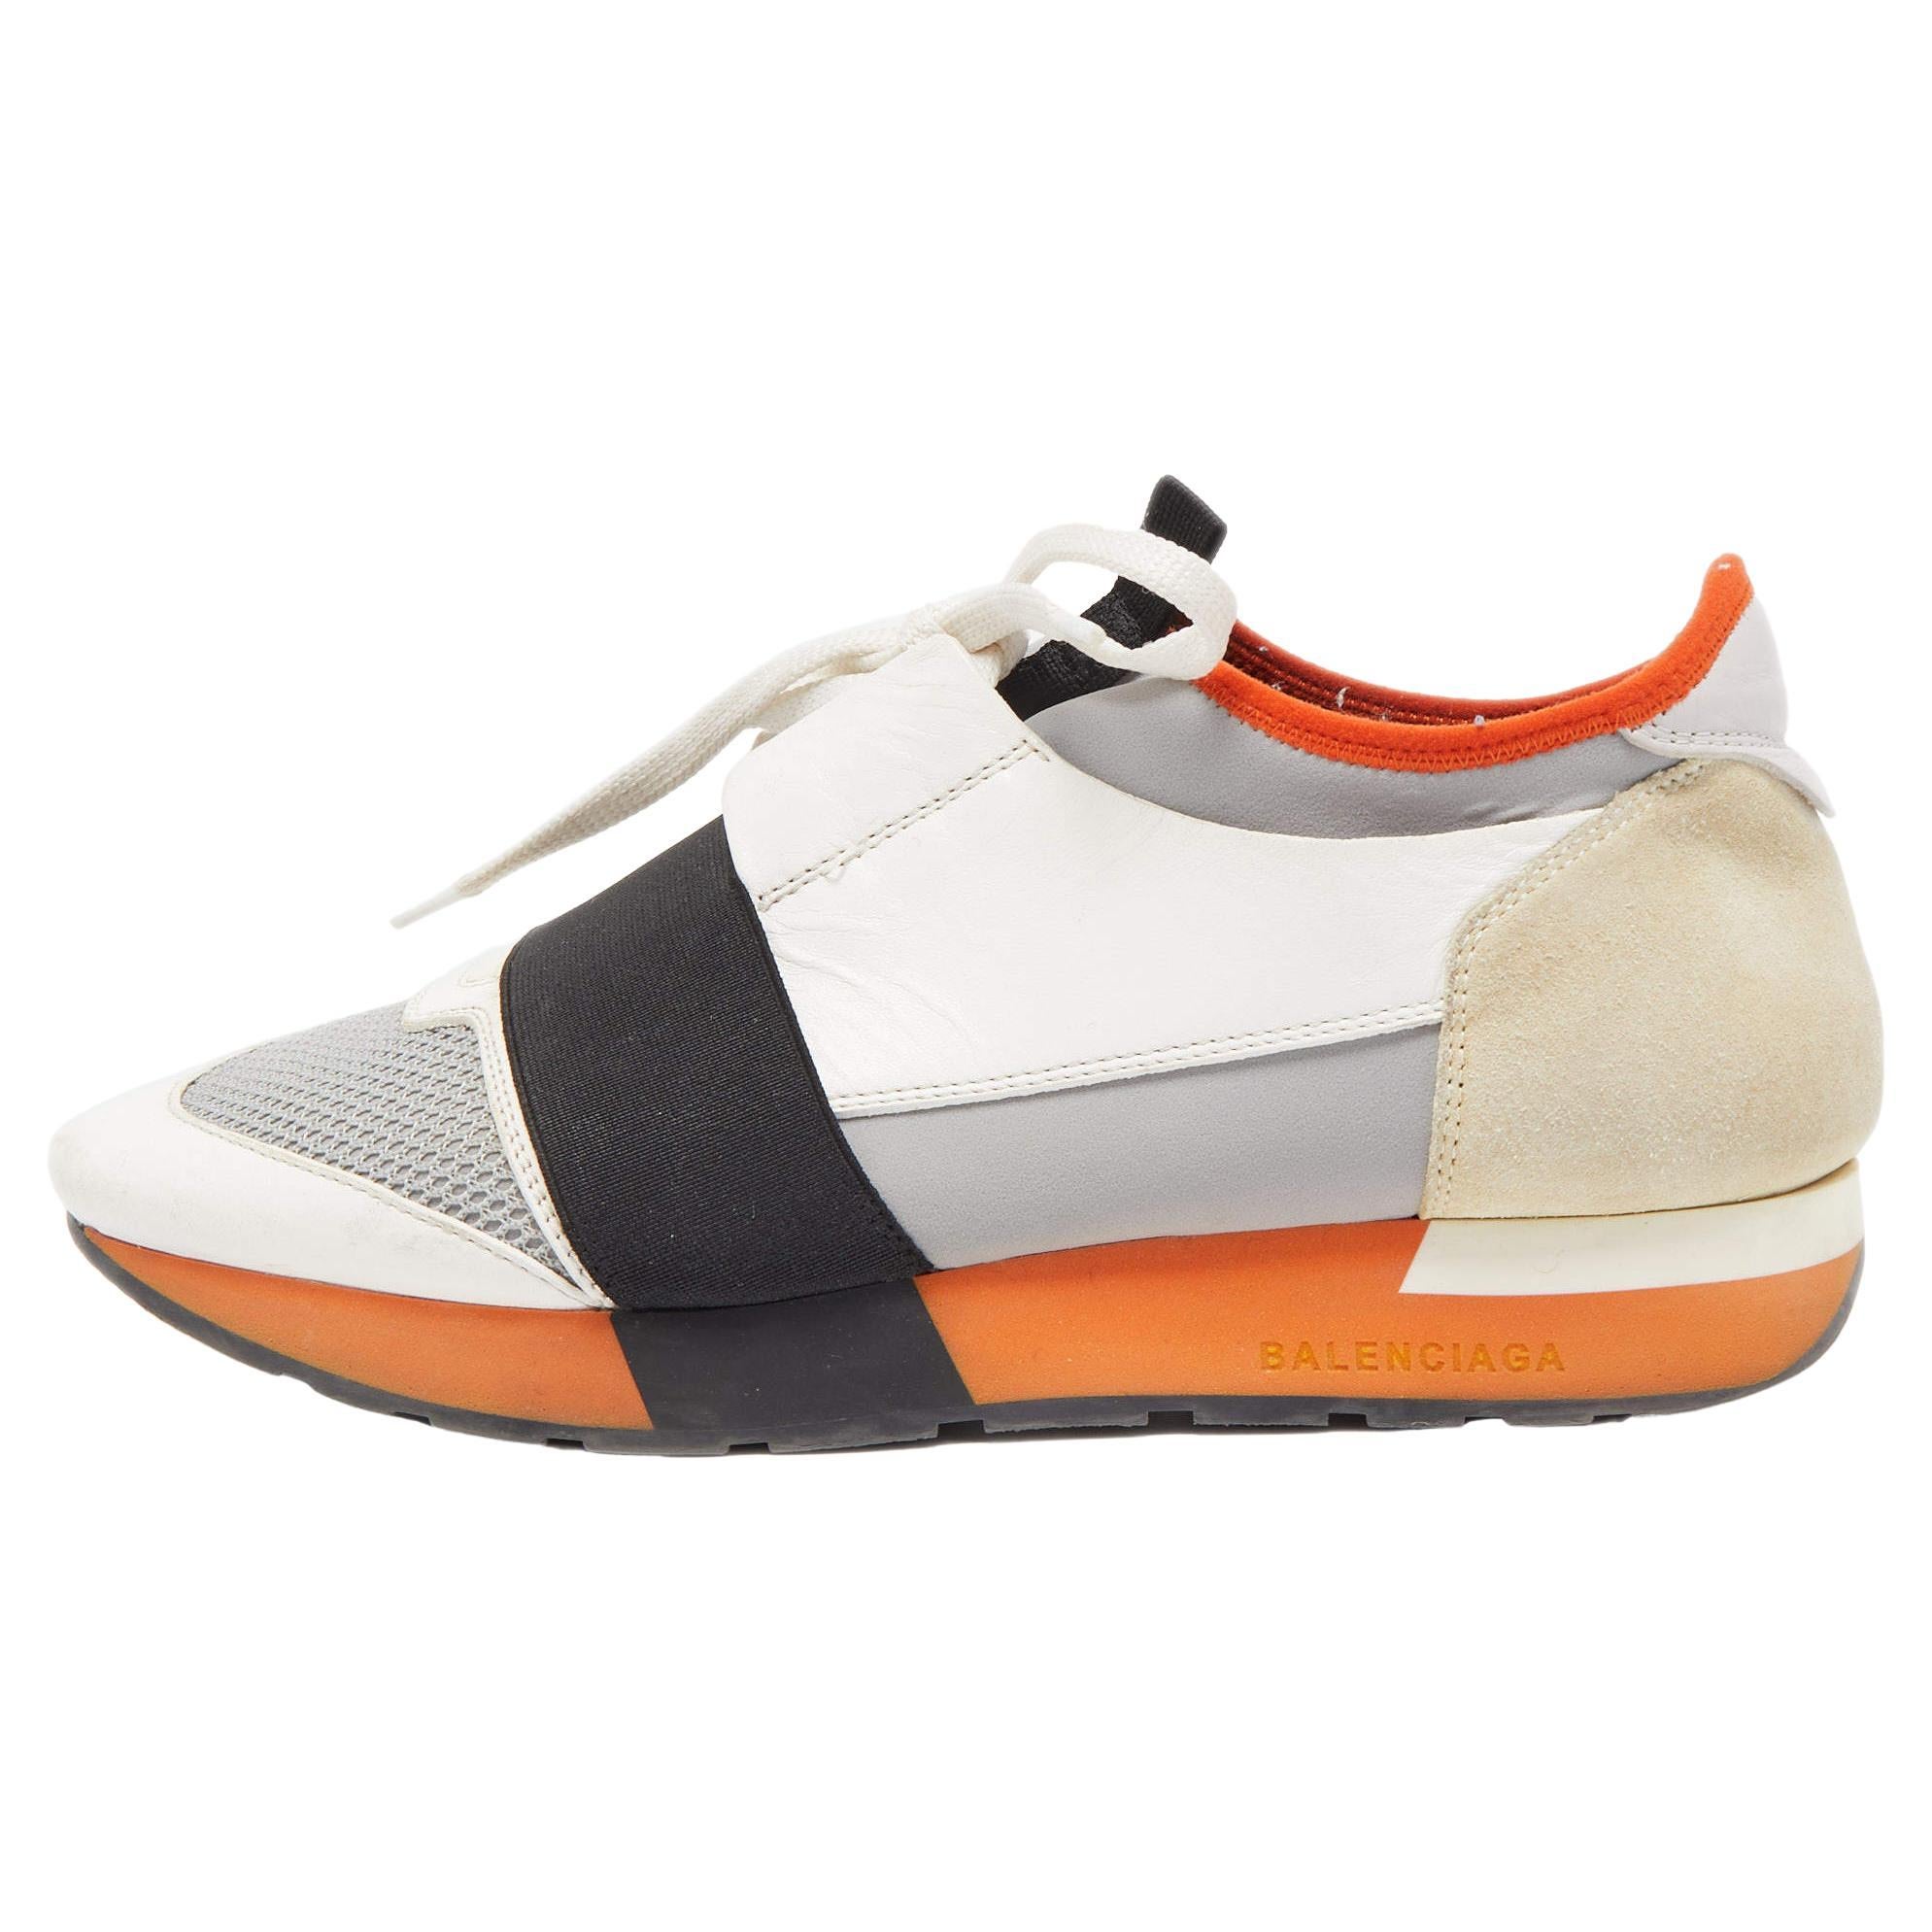 Balenciaga Tricolor Leather and Mesh Race Runner Sneakers Size 40 For Sale